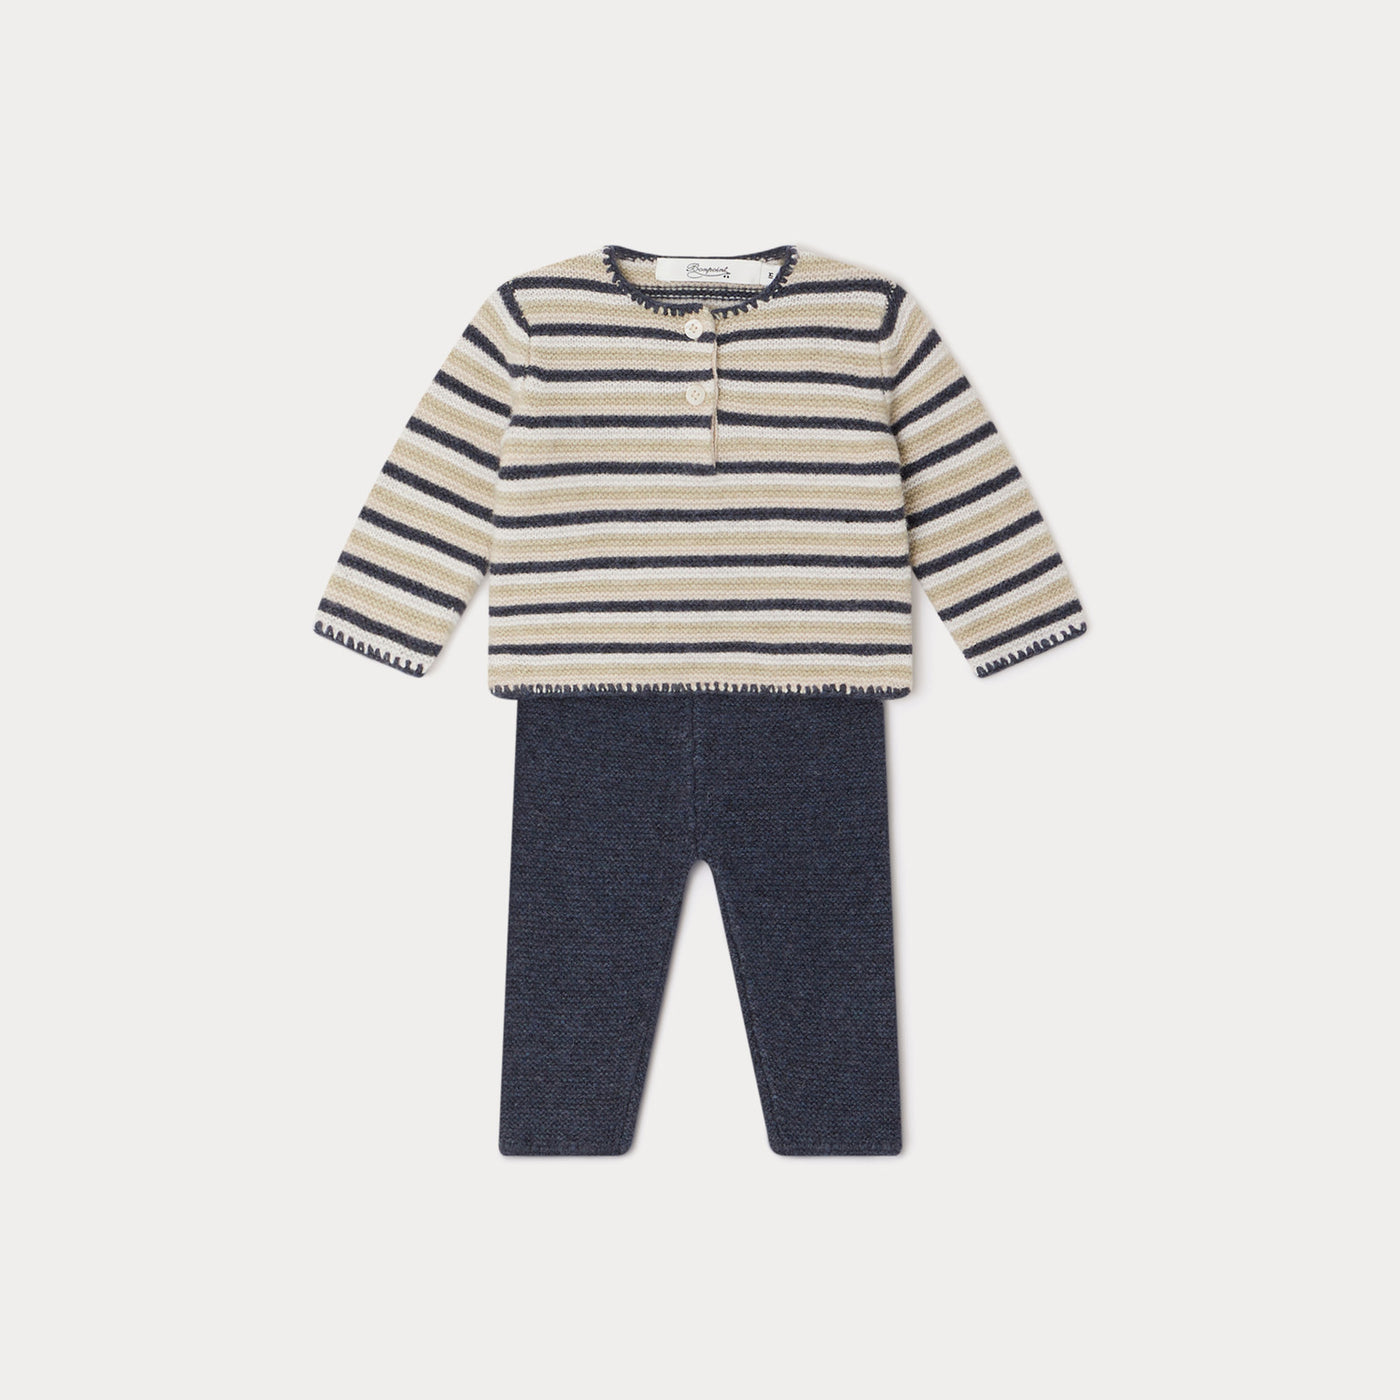 Bonpoint blue and tan baby knit, striped set